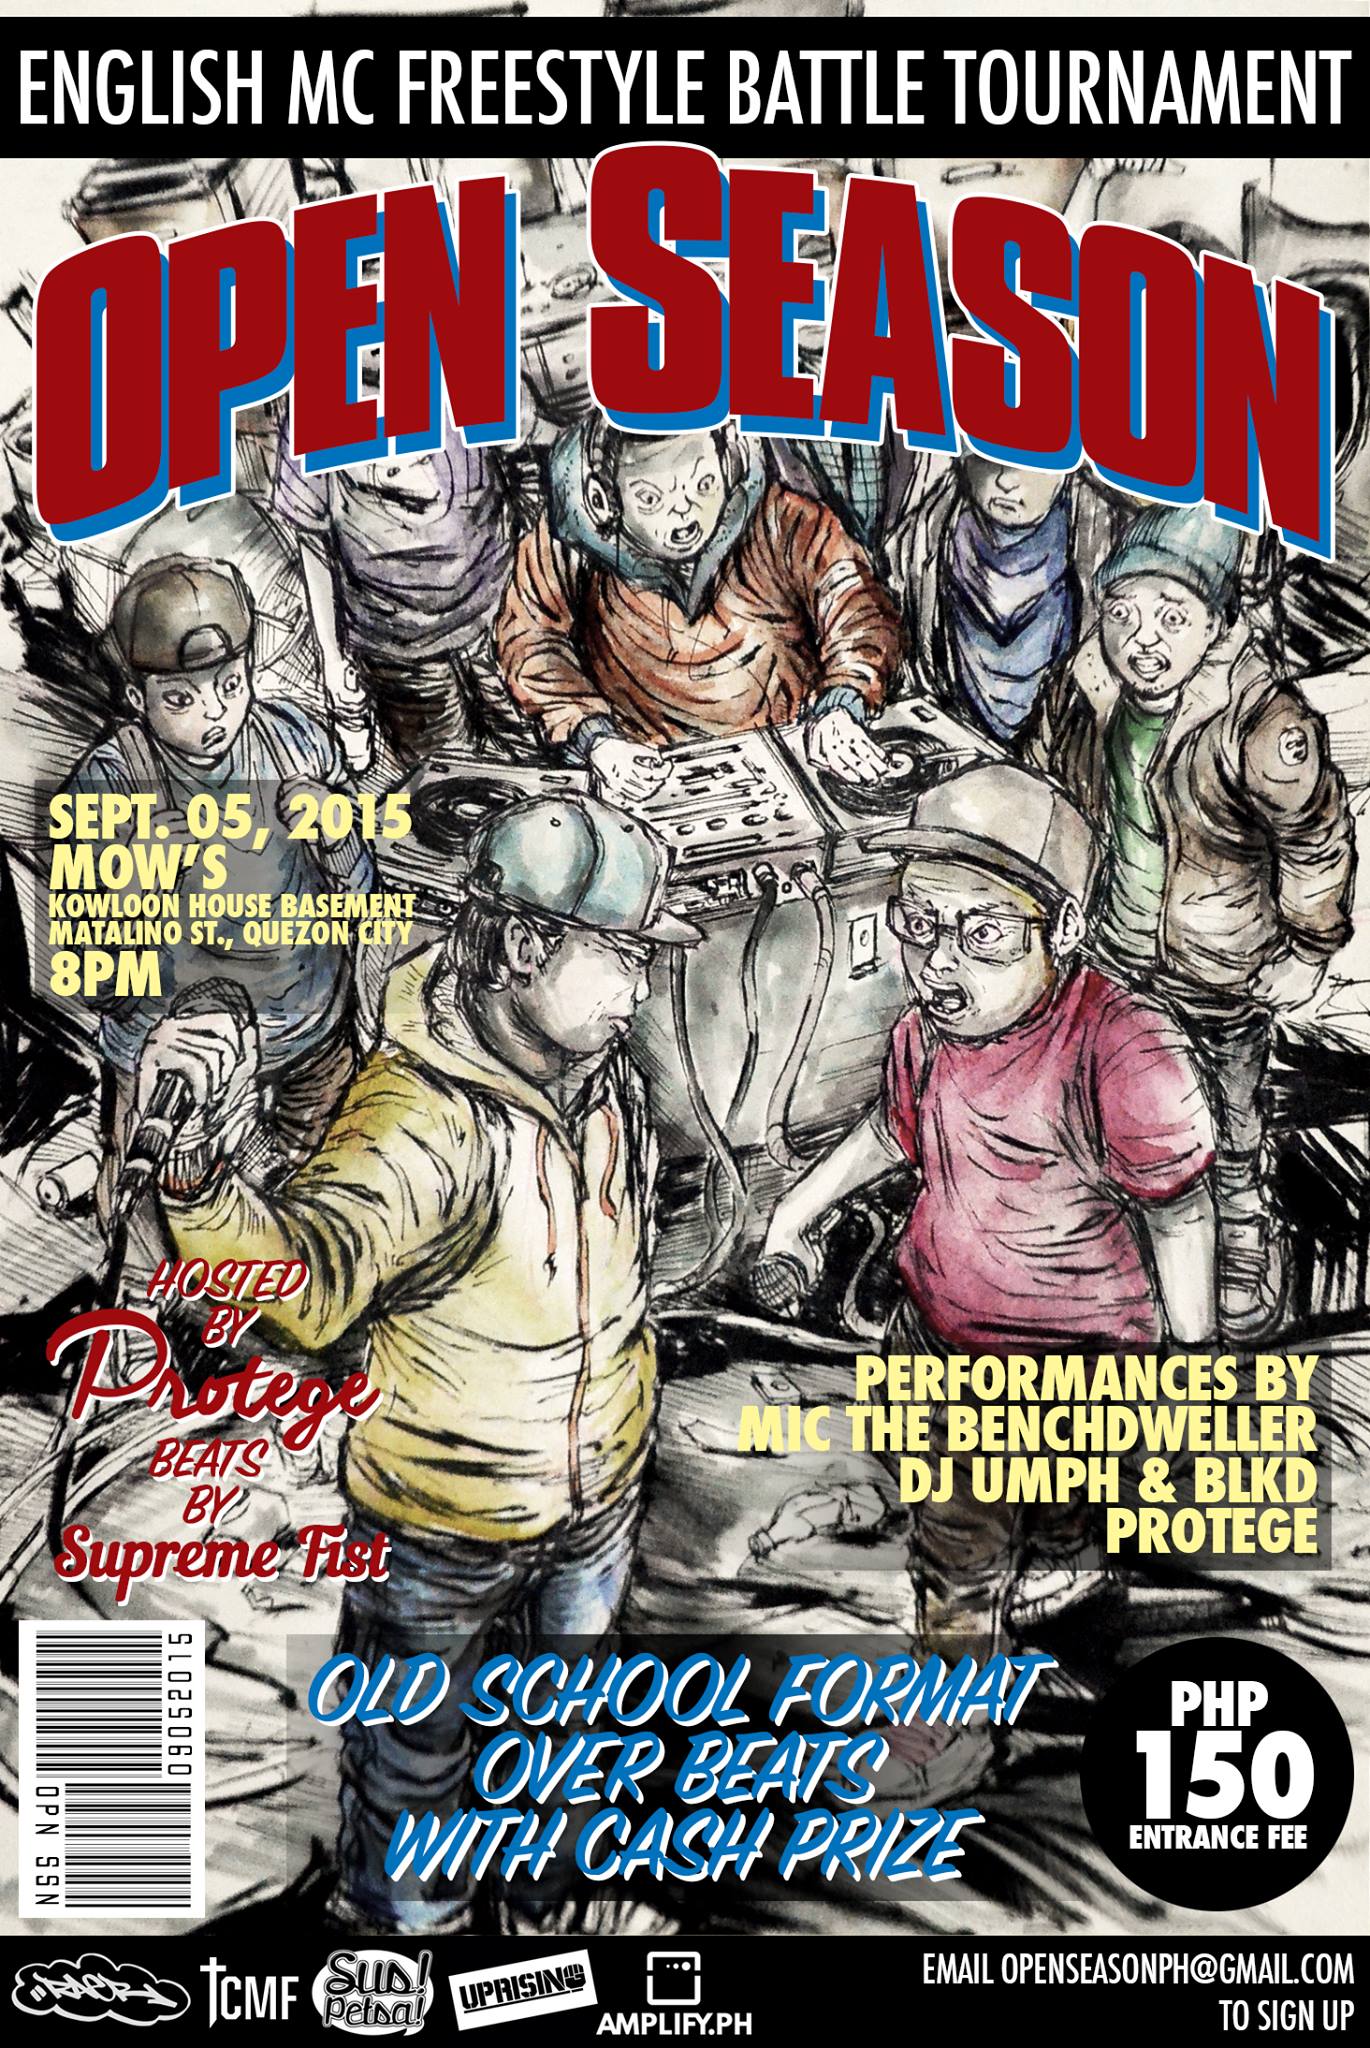 Open Season 2015: English MC Freestyle Battle Tournament     Saturday, September 5     at 8:00pm - 2:00am     Sep 5 at 8:00pm to Sep 6 at 2:00am     	     Show Map     Mow's     Kowloon House Basement, 20 Matalino St., 1100 Quezon City, Philippines     	     Invited by Open Season English MC Freestyle Battle Tournament + Performances & Open Mic Enough people wanted it so we put it together. Check out the teaser for Open Season. It’s going down September 5. There are 16 slots and half have already been filled. Great to see both vets and new heads alike hop in on this. It’s gonna be a fun night of hip hop so come through! Entrants for the tournament will not be revealed until the event itself and emcees will not know who else is joining unless they have announced it themselves. There will be no official video for the battles so you will have to come and see it live! Beats By: Supreme Fist Hosted By: Protege Old School Format Over Beats w/ Cash Prize (scroll down the event page to see details)